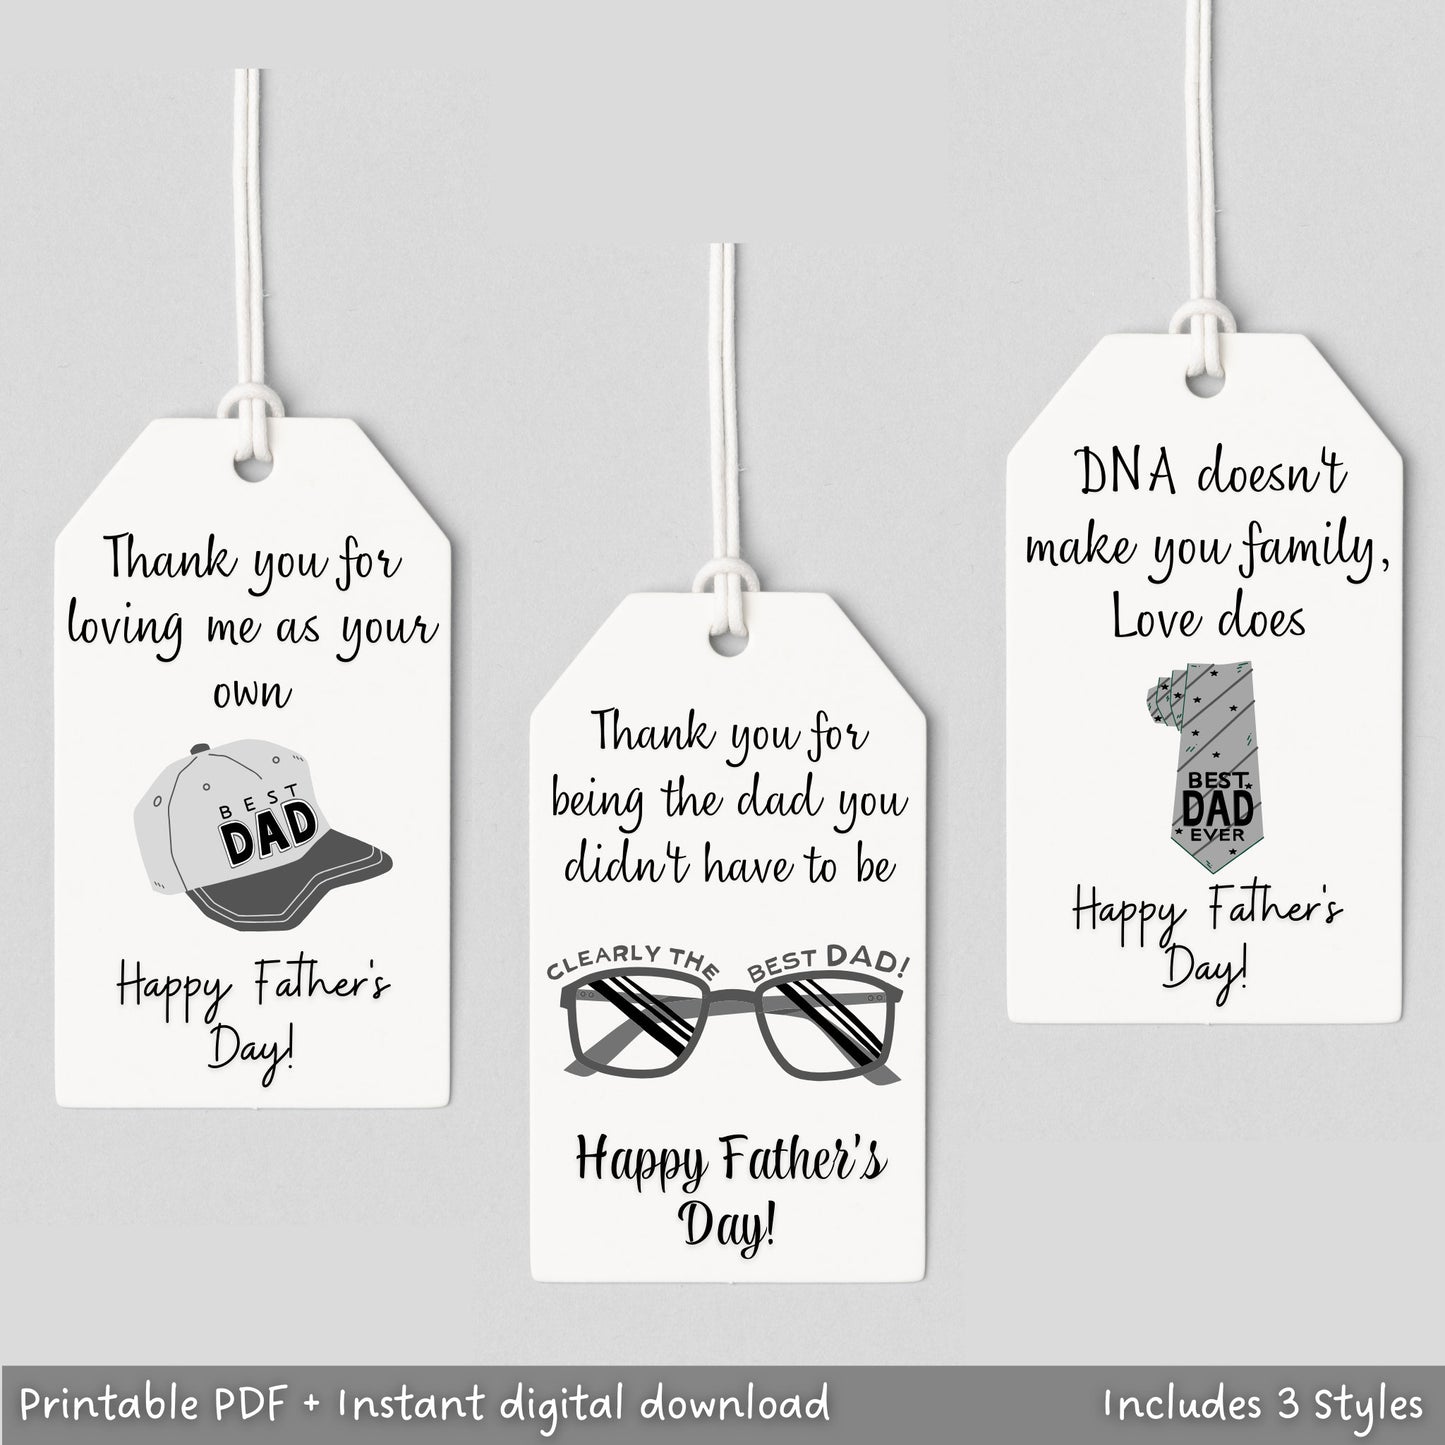 These Fathers Day gift tags for step Dad are printable and an instant digital download! There are 3 different styles. Simply download, print and gift away! These add a perfect finishing touch to your special and thoughtful gift for your step Dad!